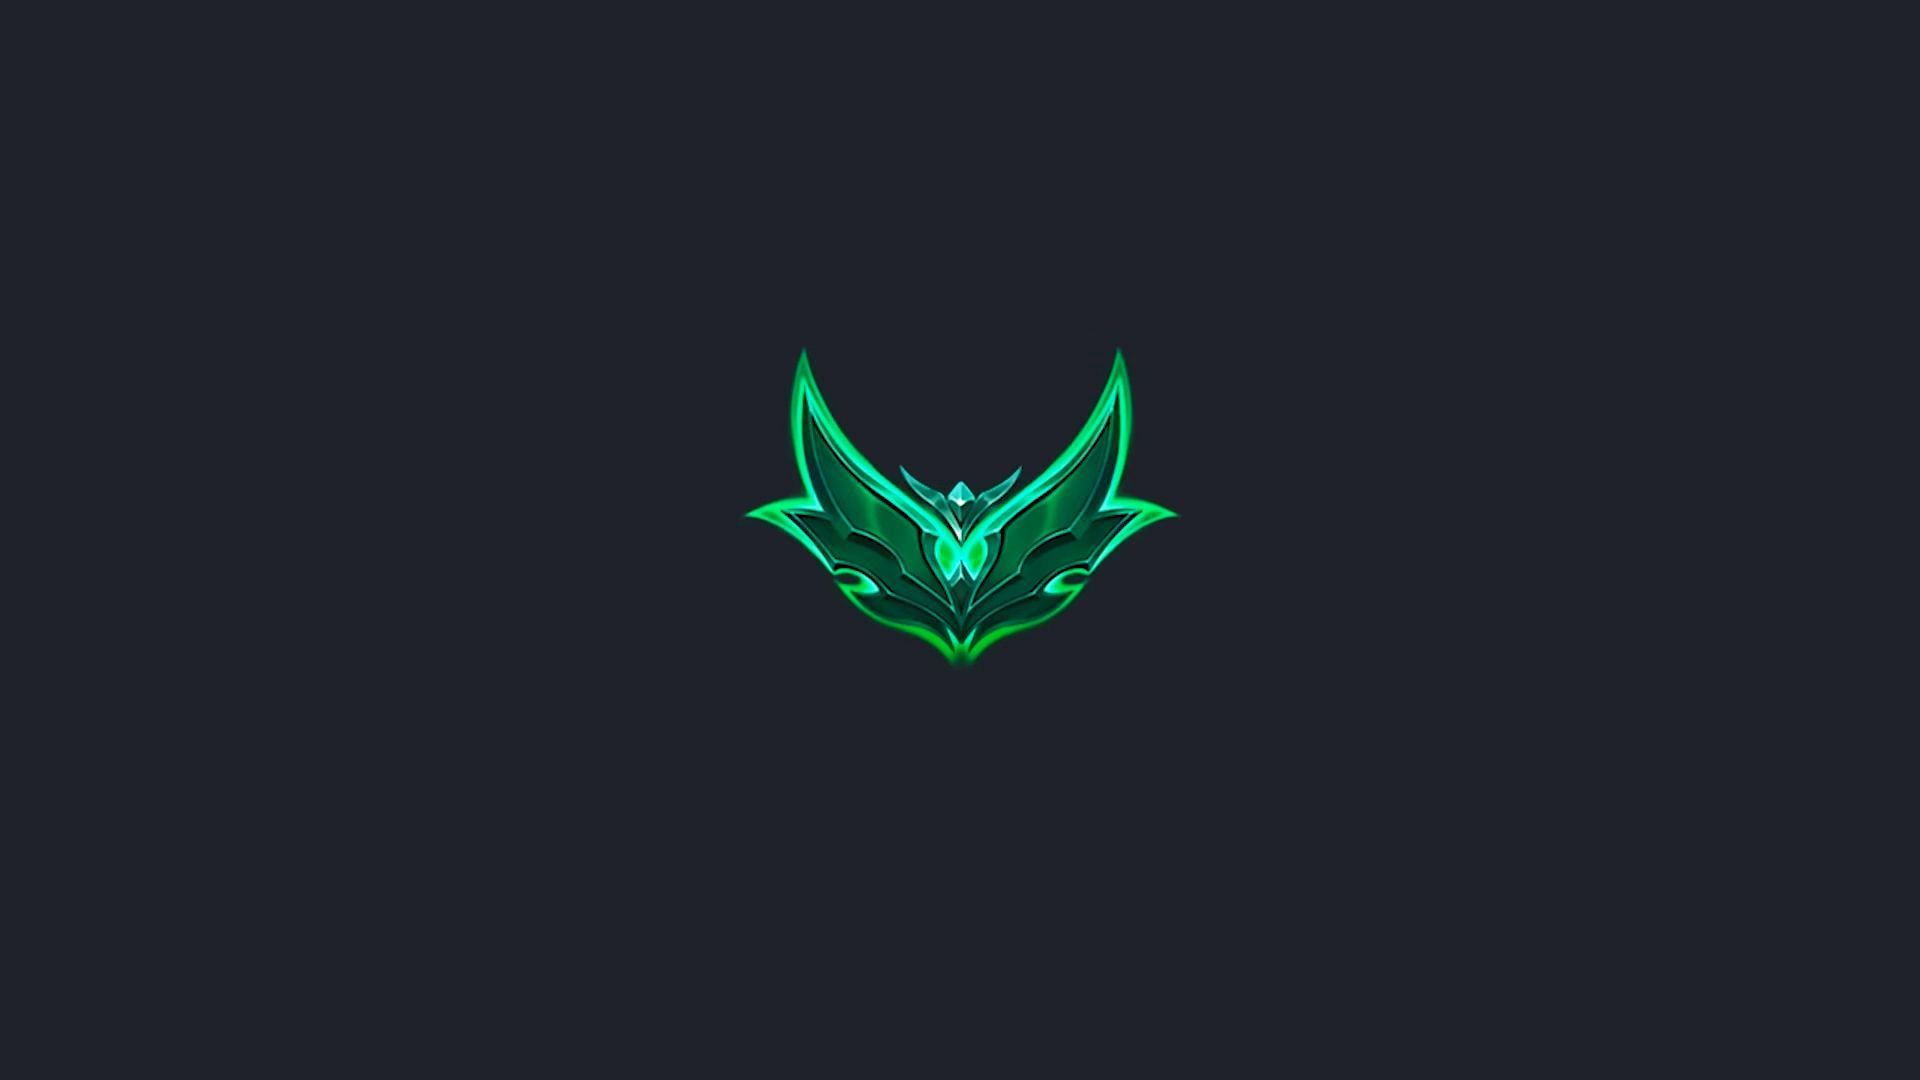 Emerald: A new rank coming to League of Legends (Image via Riot Games)